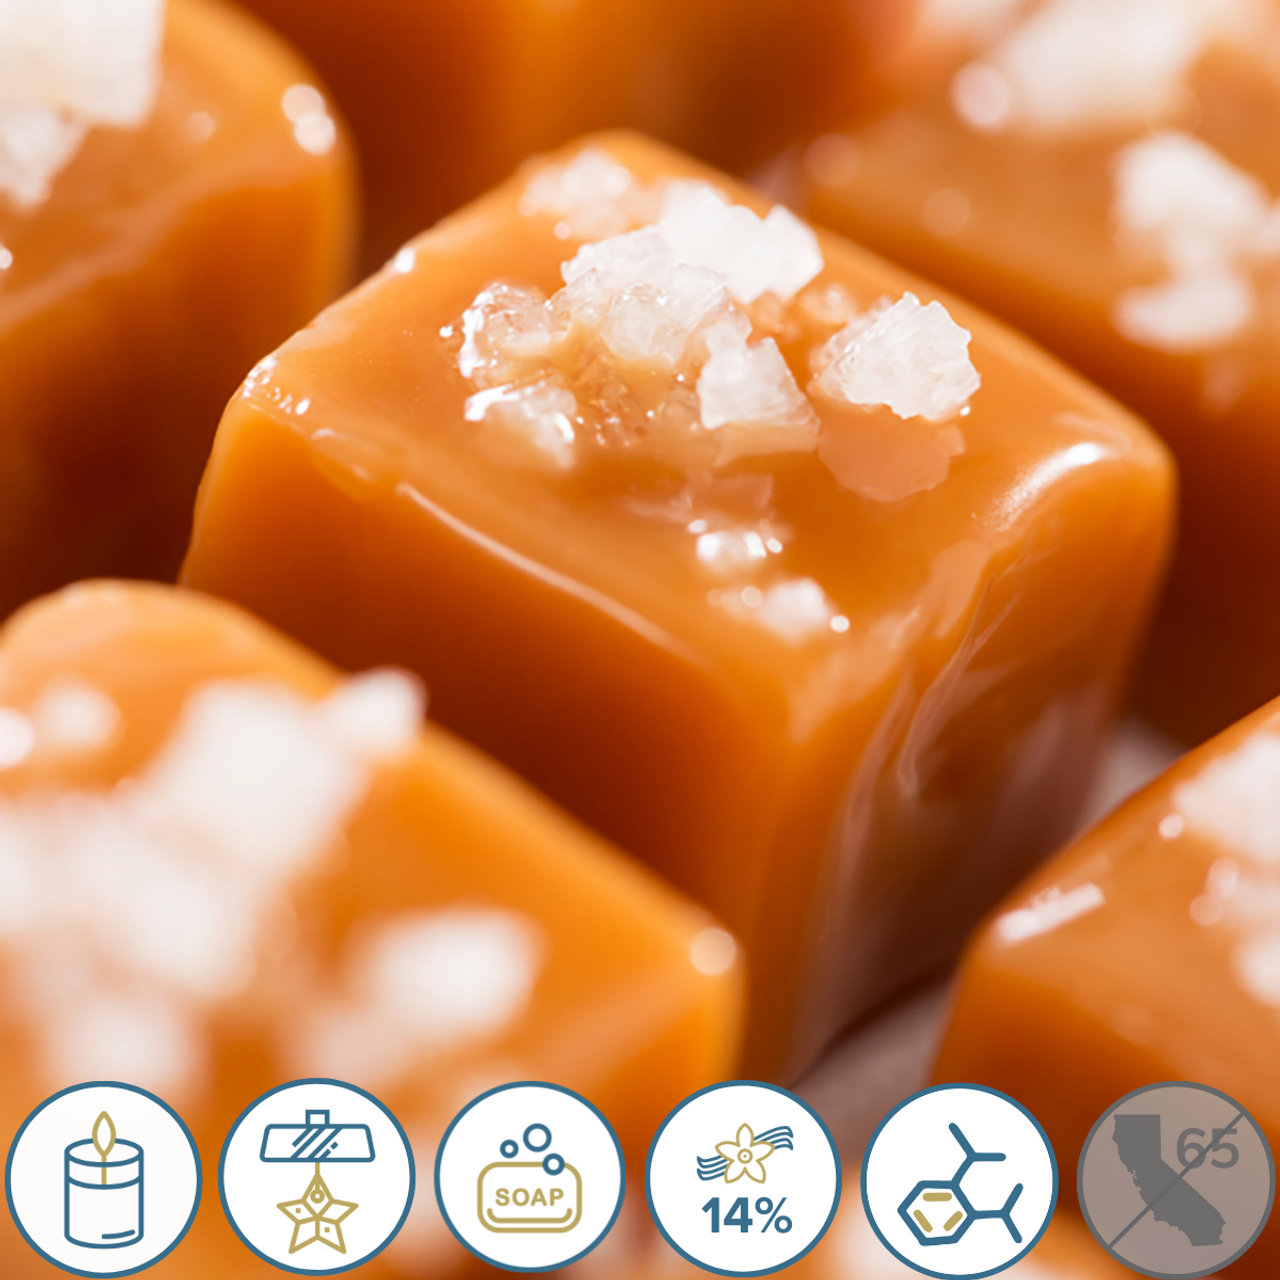 4Oz] Salted Caramel Fragrance Oil For Candle Making Scents For Soap Making,  Perfume Oils, Soy Candles, Home Scents Oil Diffusers, Bath Scent Bomb Oils,  Linen Spray, Lotions, Car Freshies 